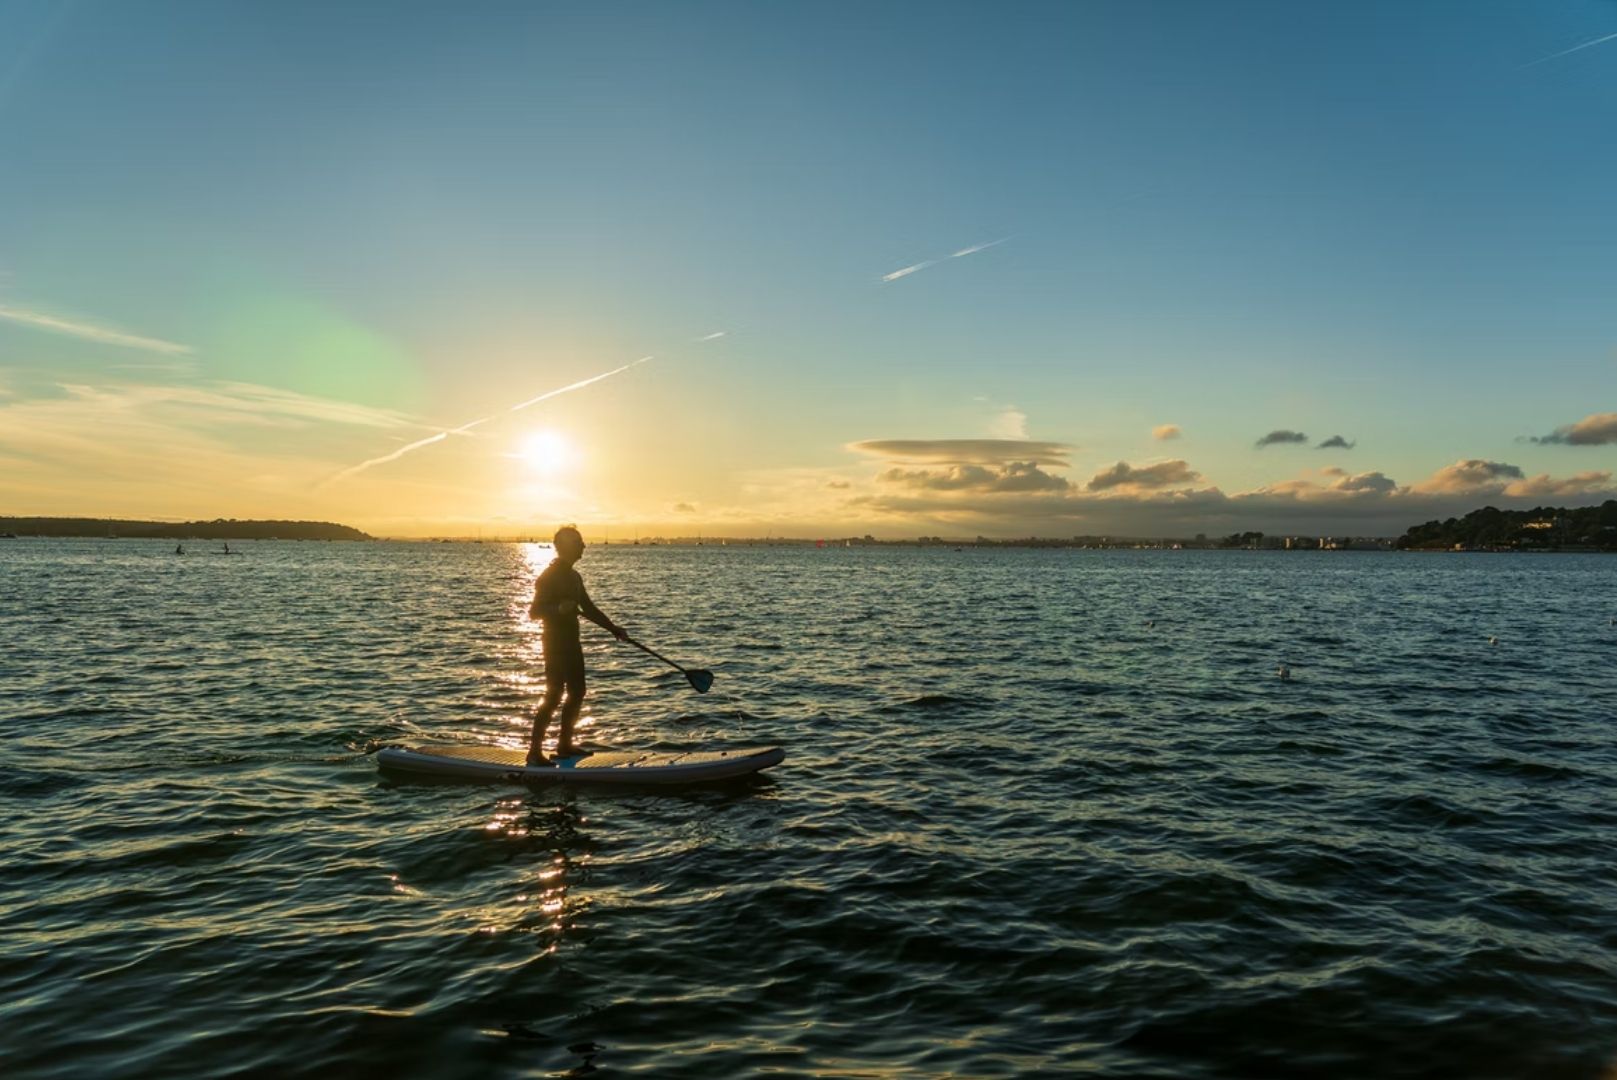 Man on paddleboard in sunset